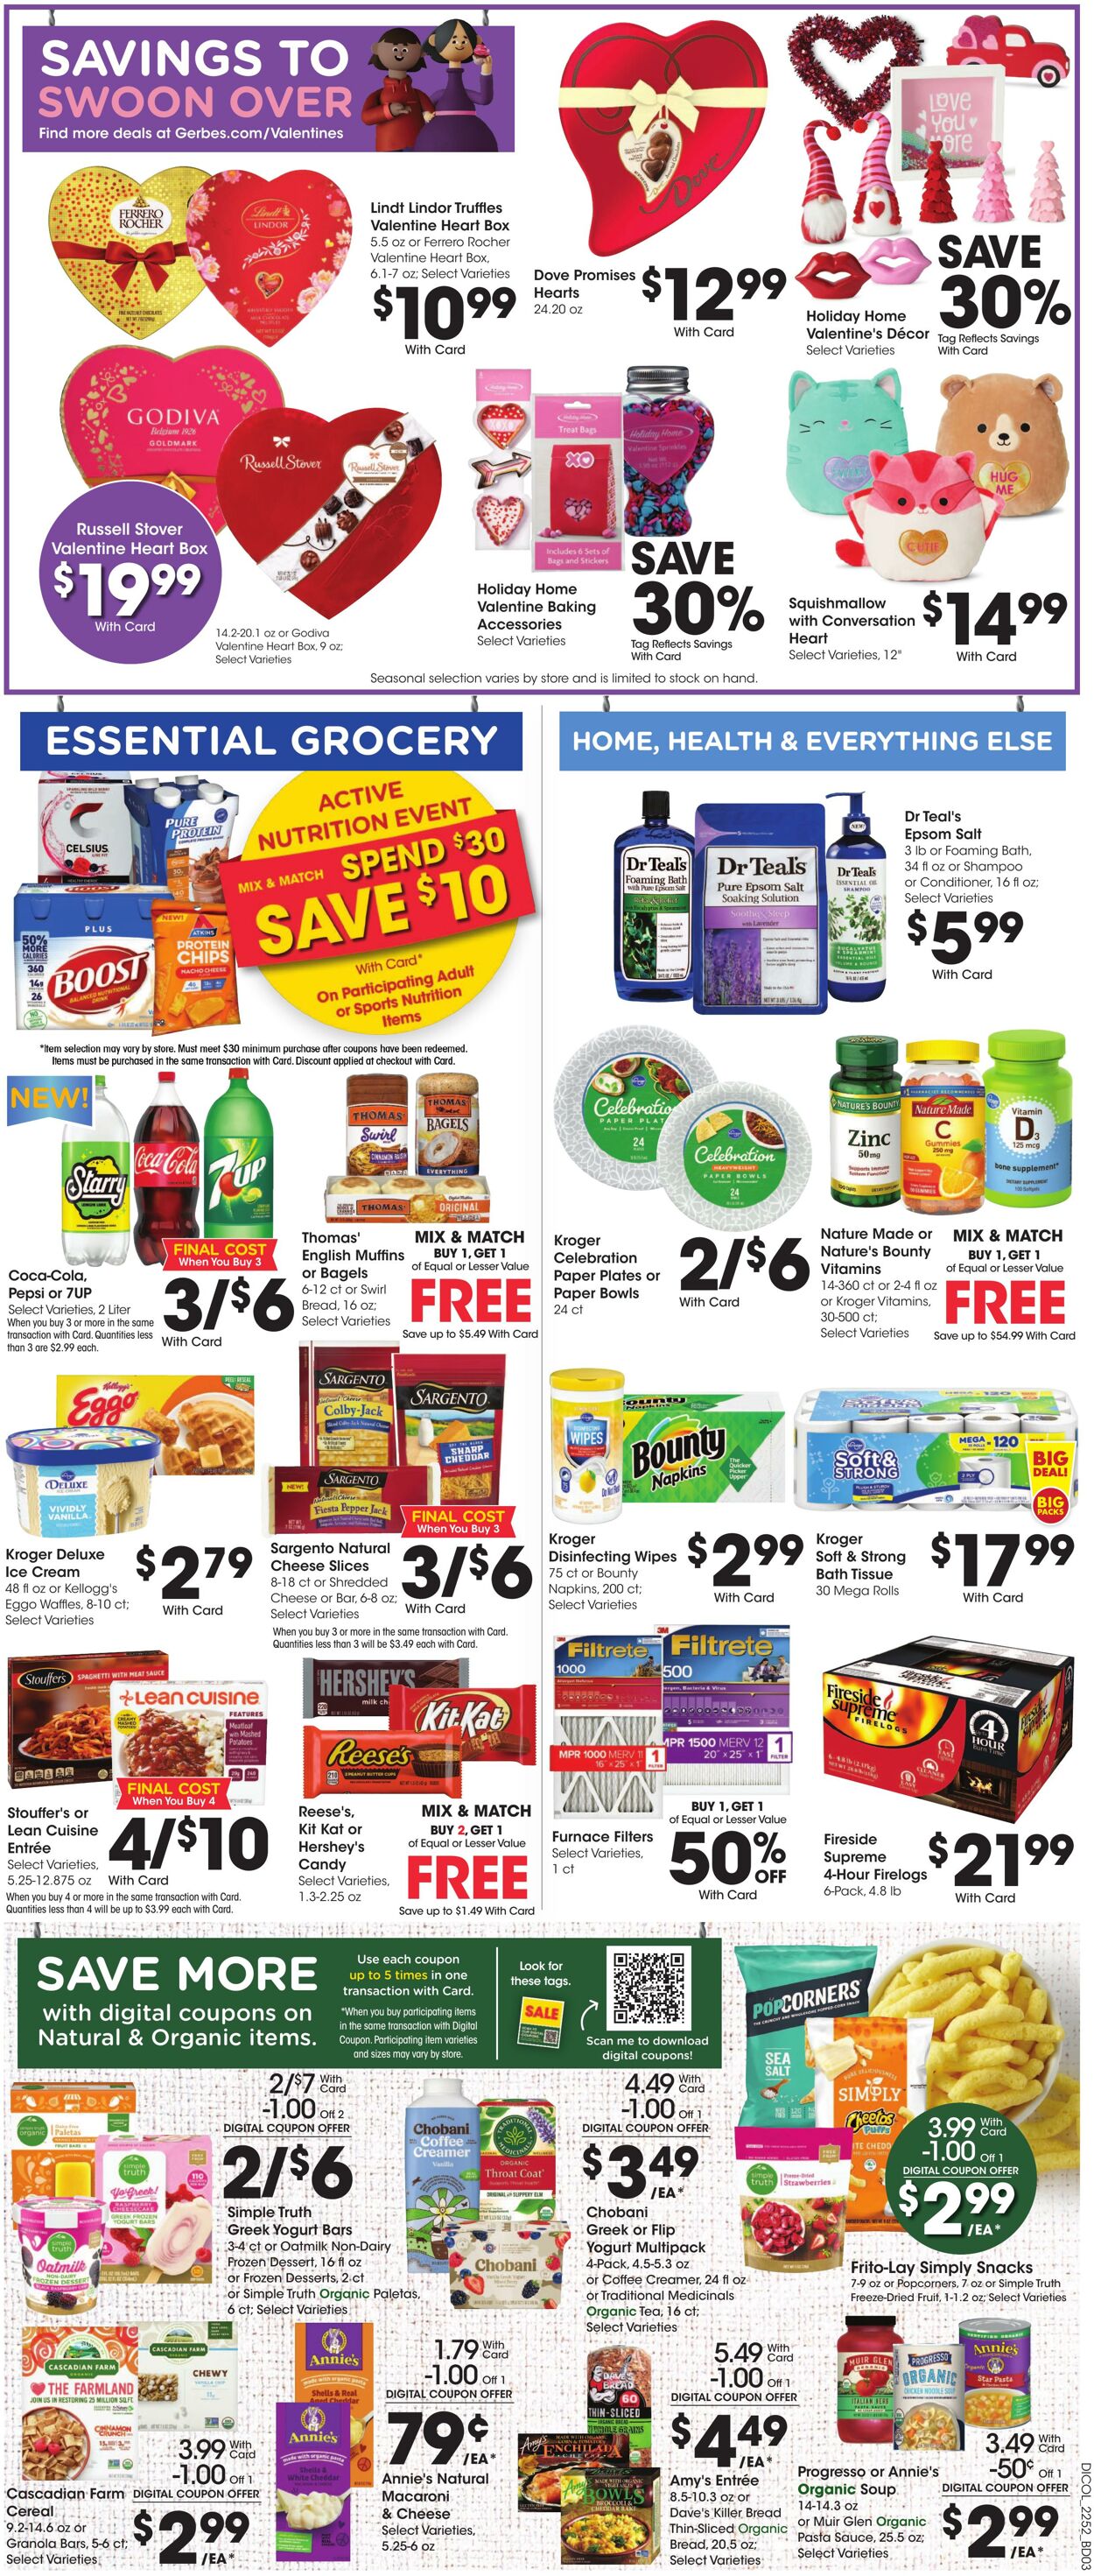 Weekly ad Gerbes Supermarkets 01/25/2023 - 01/31/2023